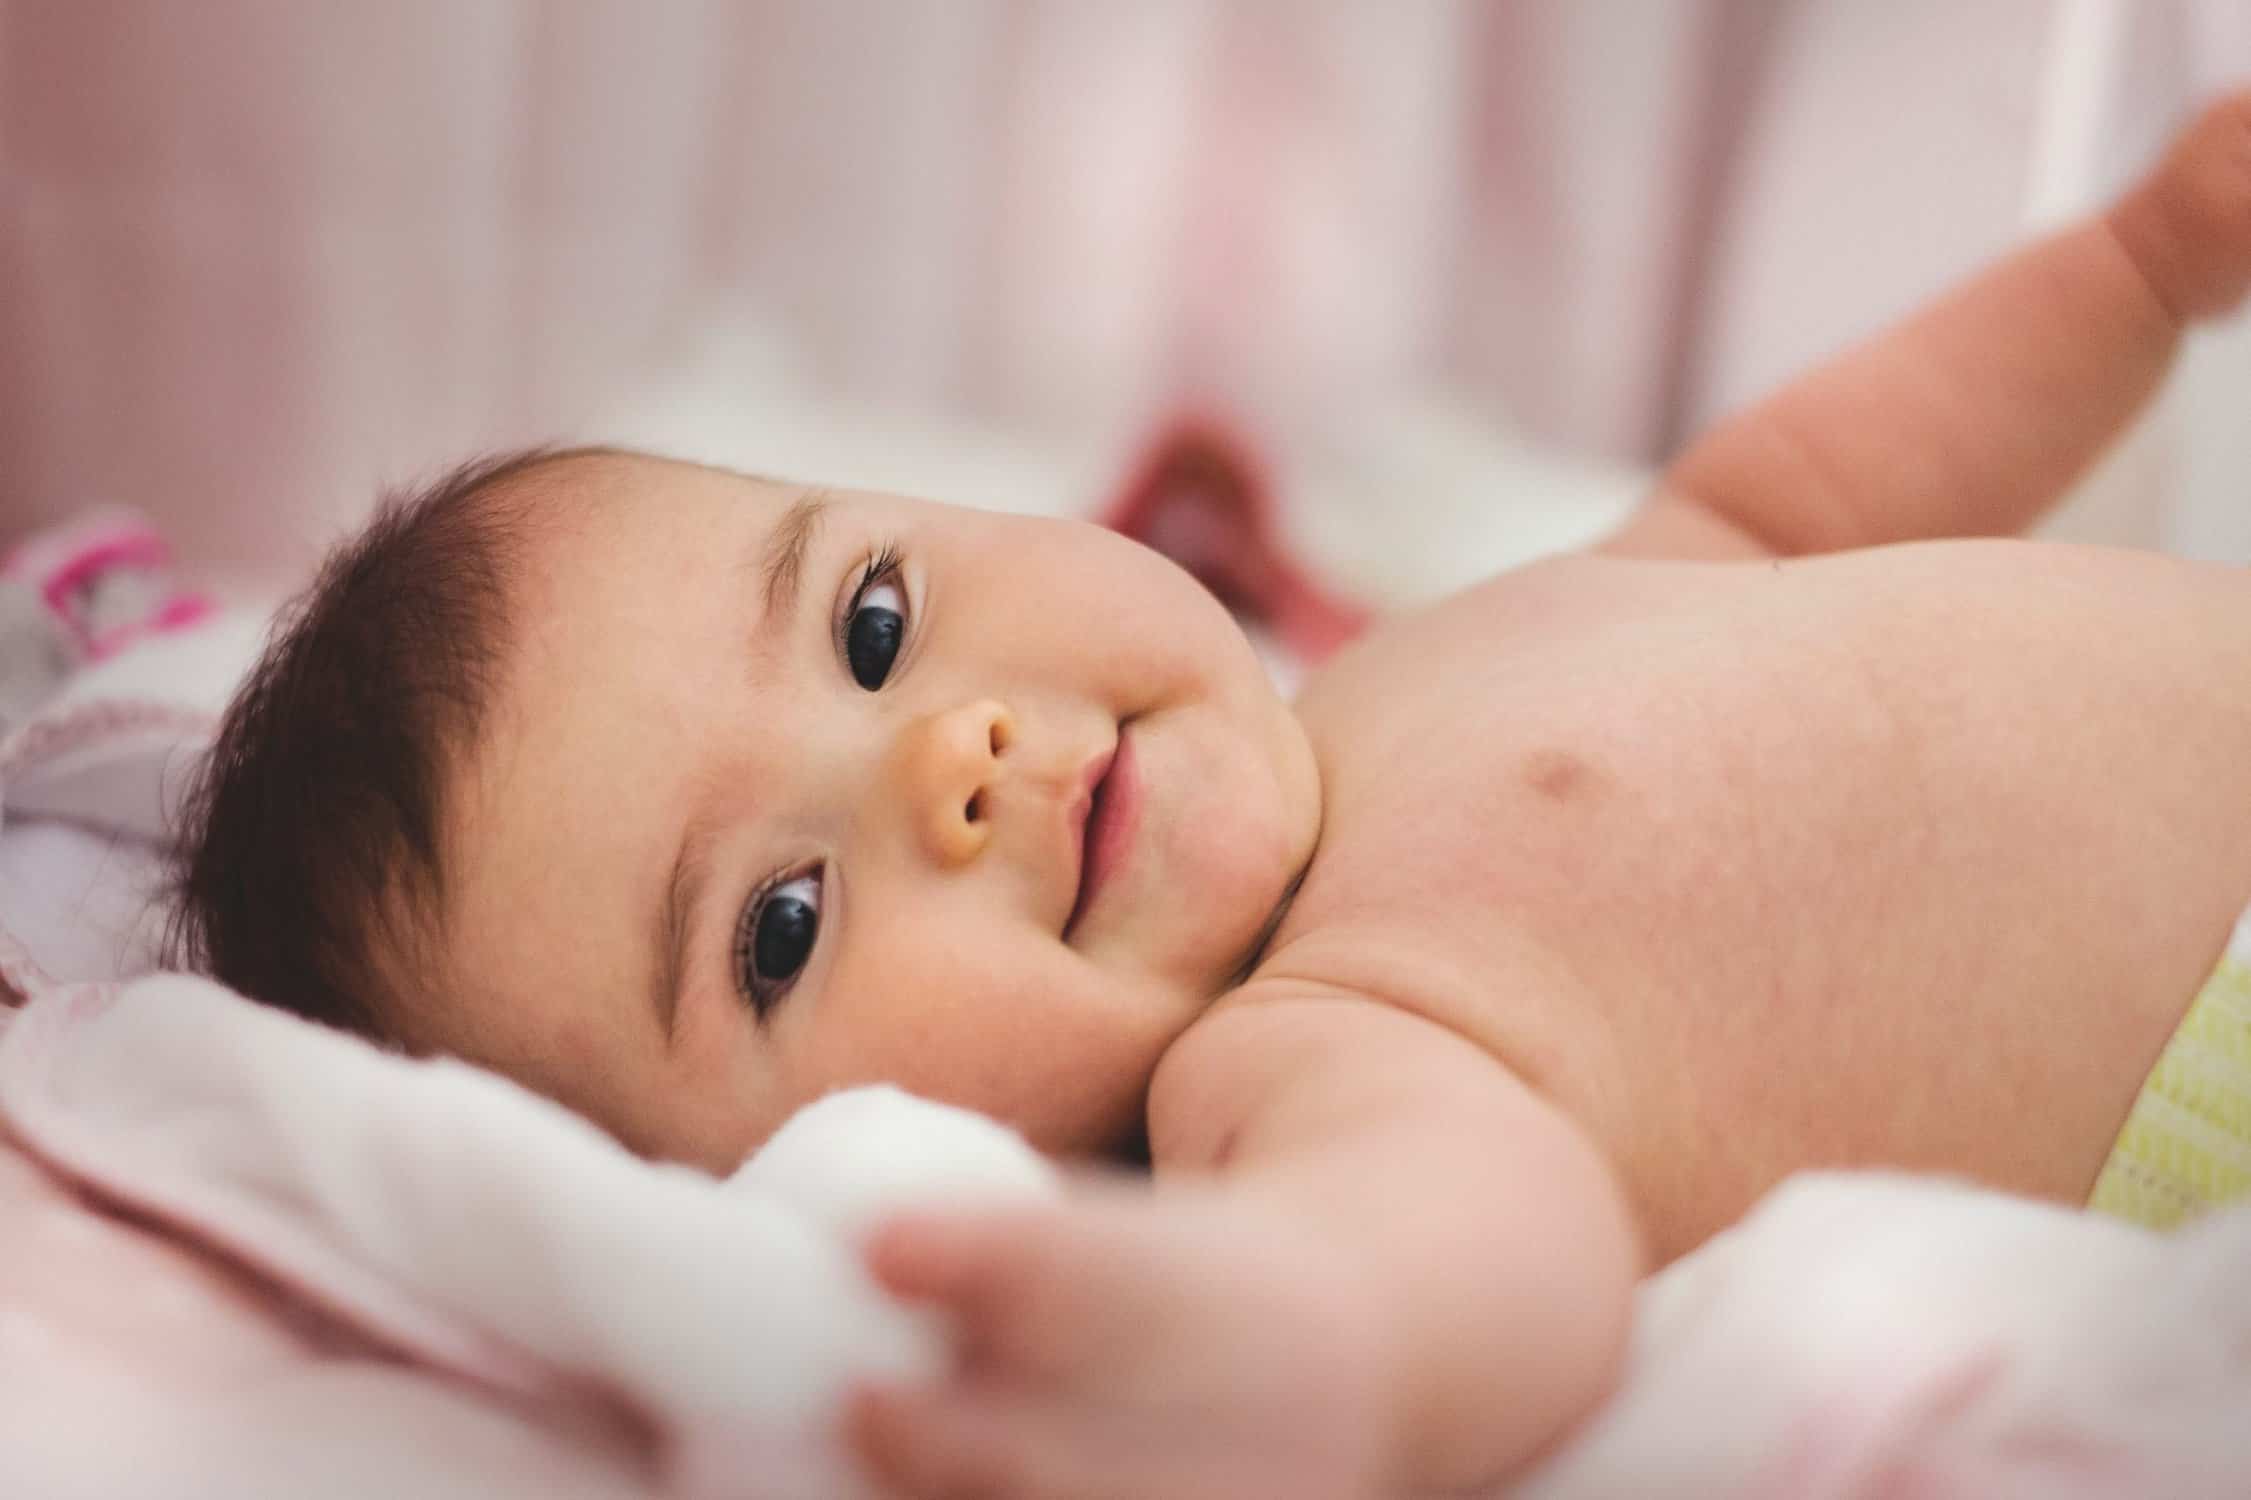 When Do Babies Start to Recognize Their Own Name?